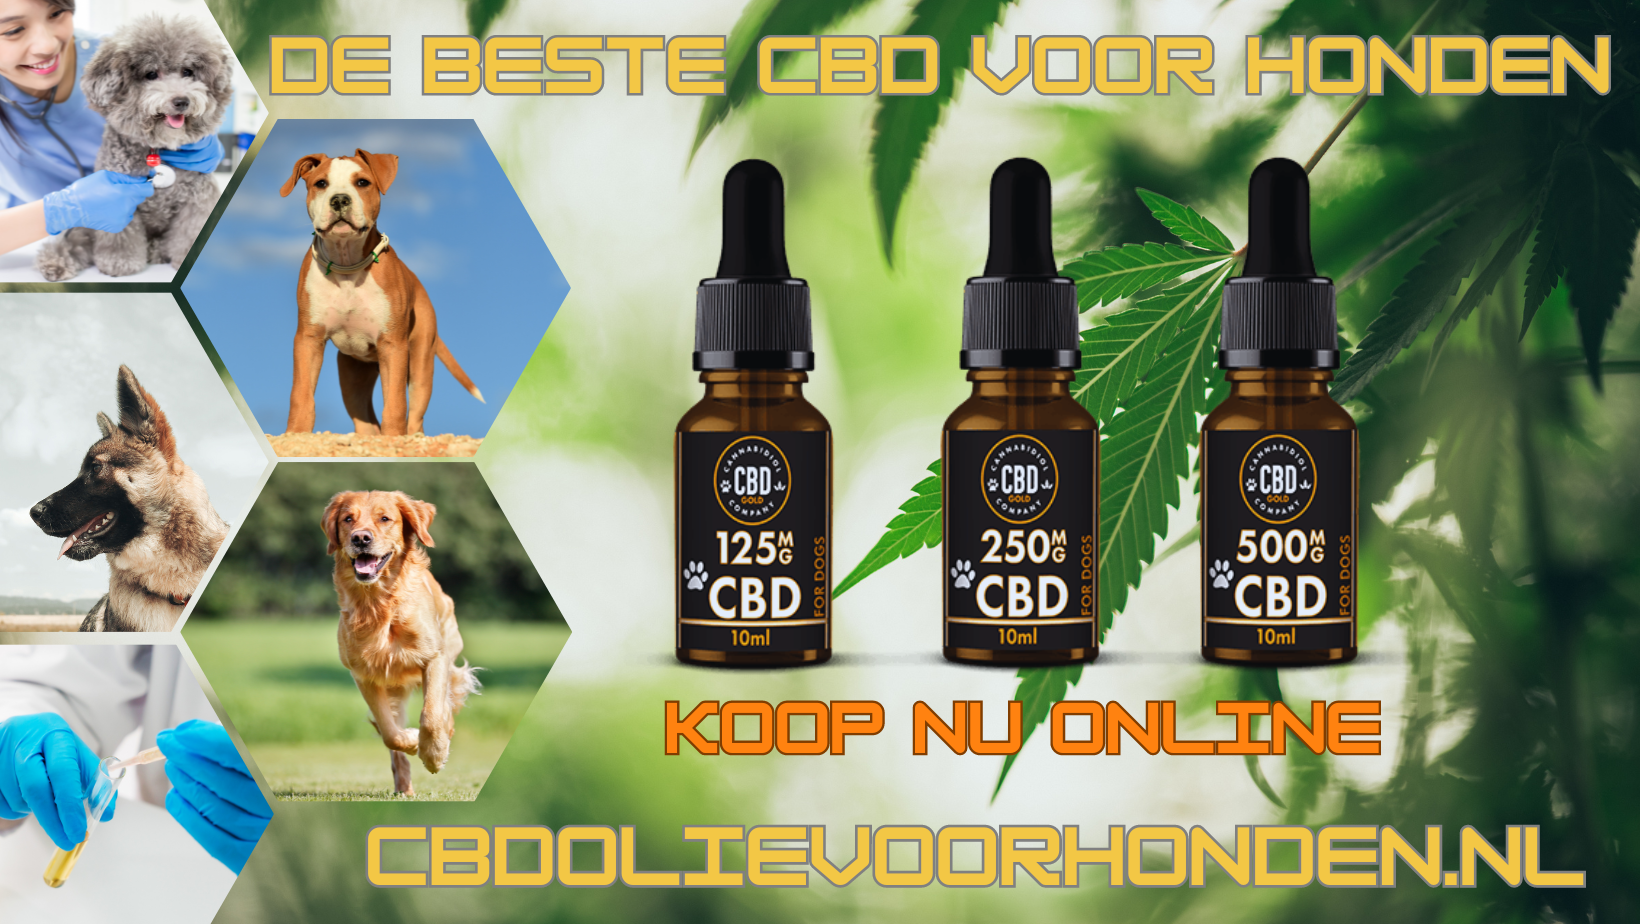 SEPA pay in advance cbd oil for dogs